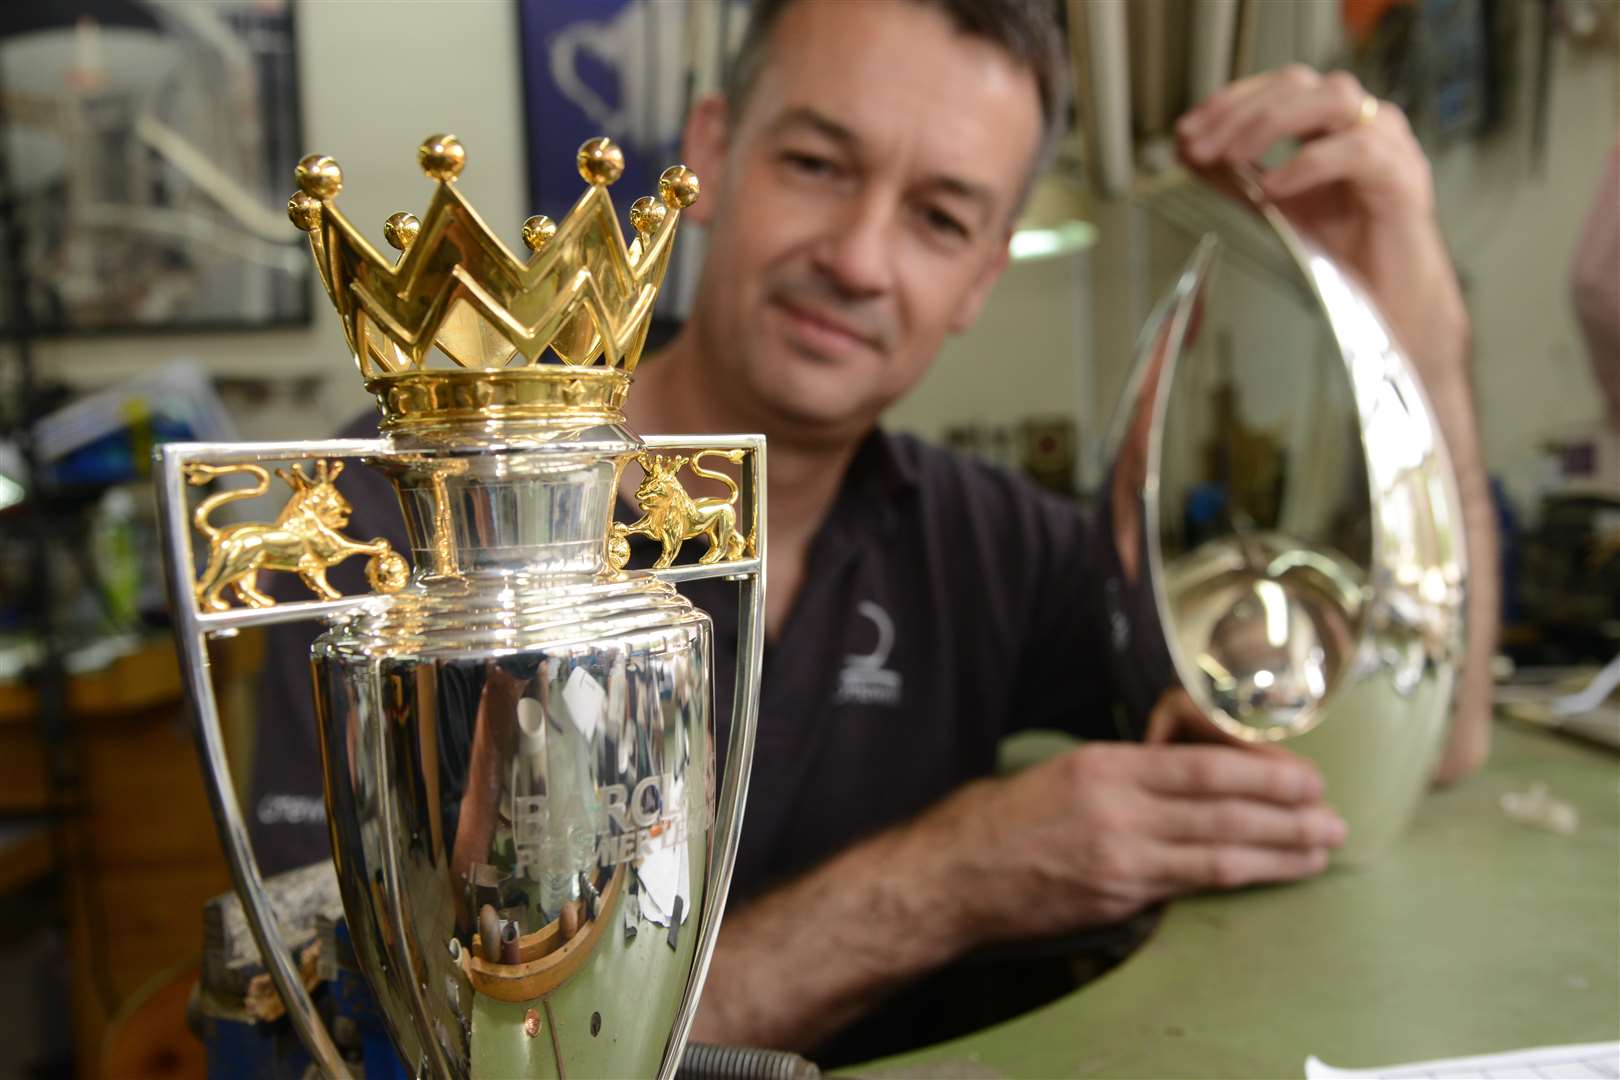 Steve Ottewill and a miniature version of the Premier League trophy